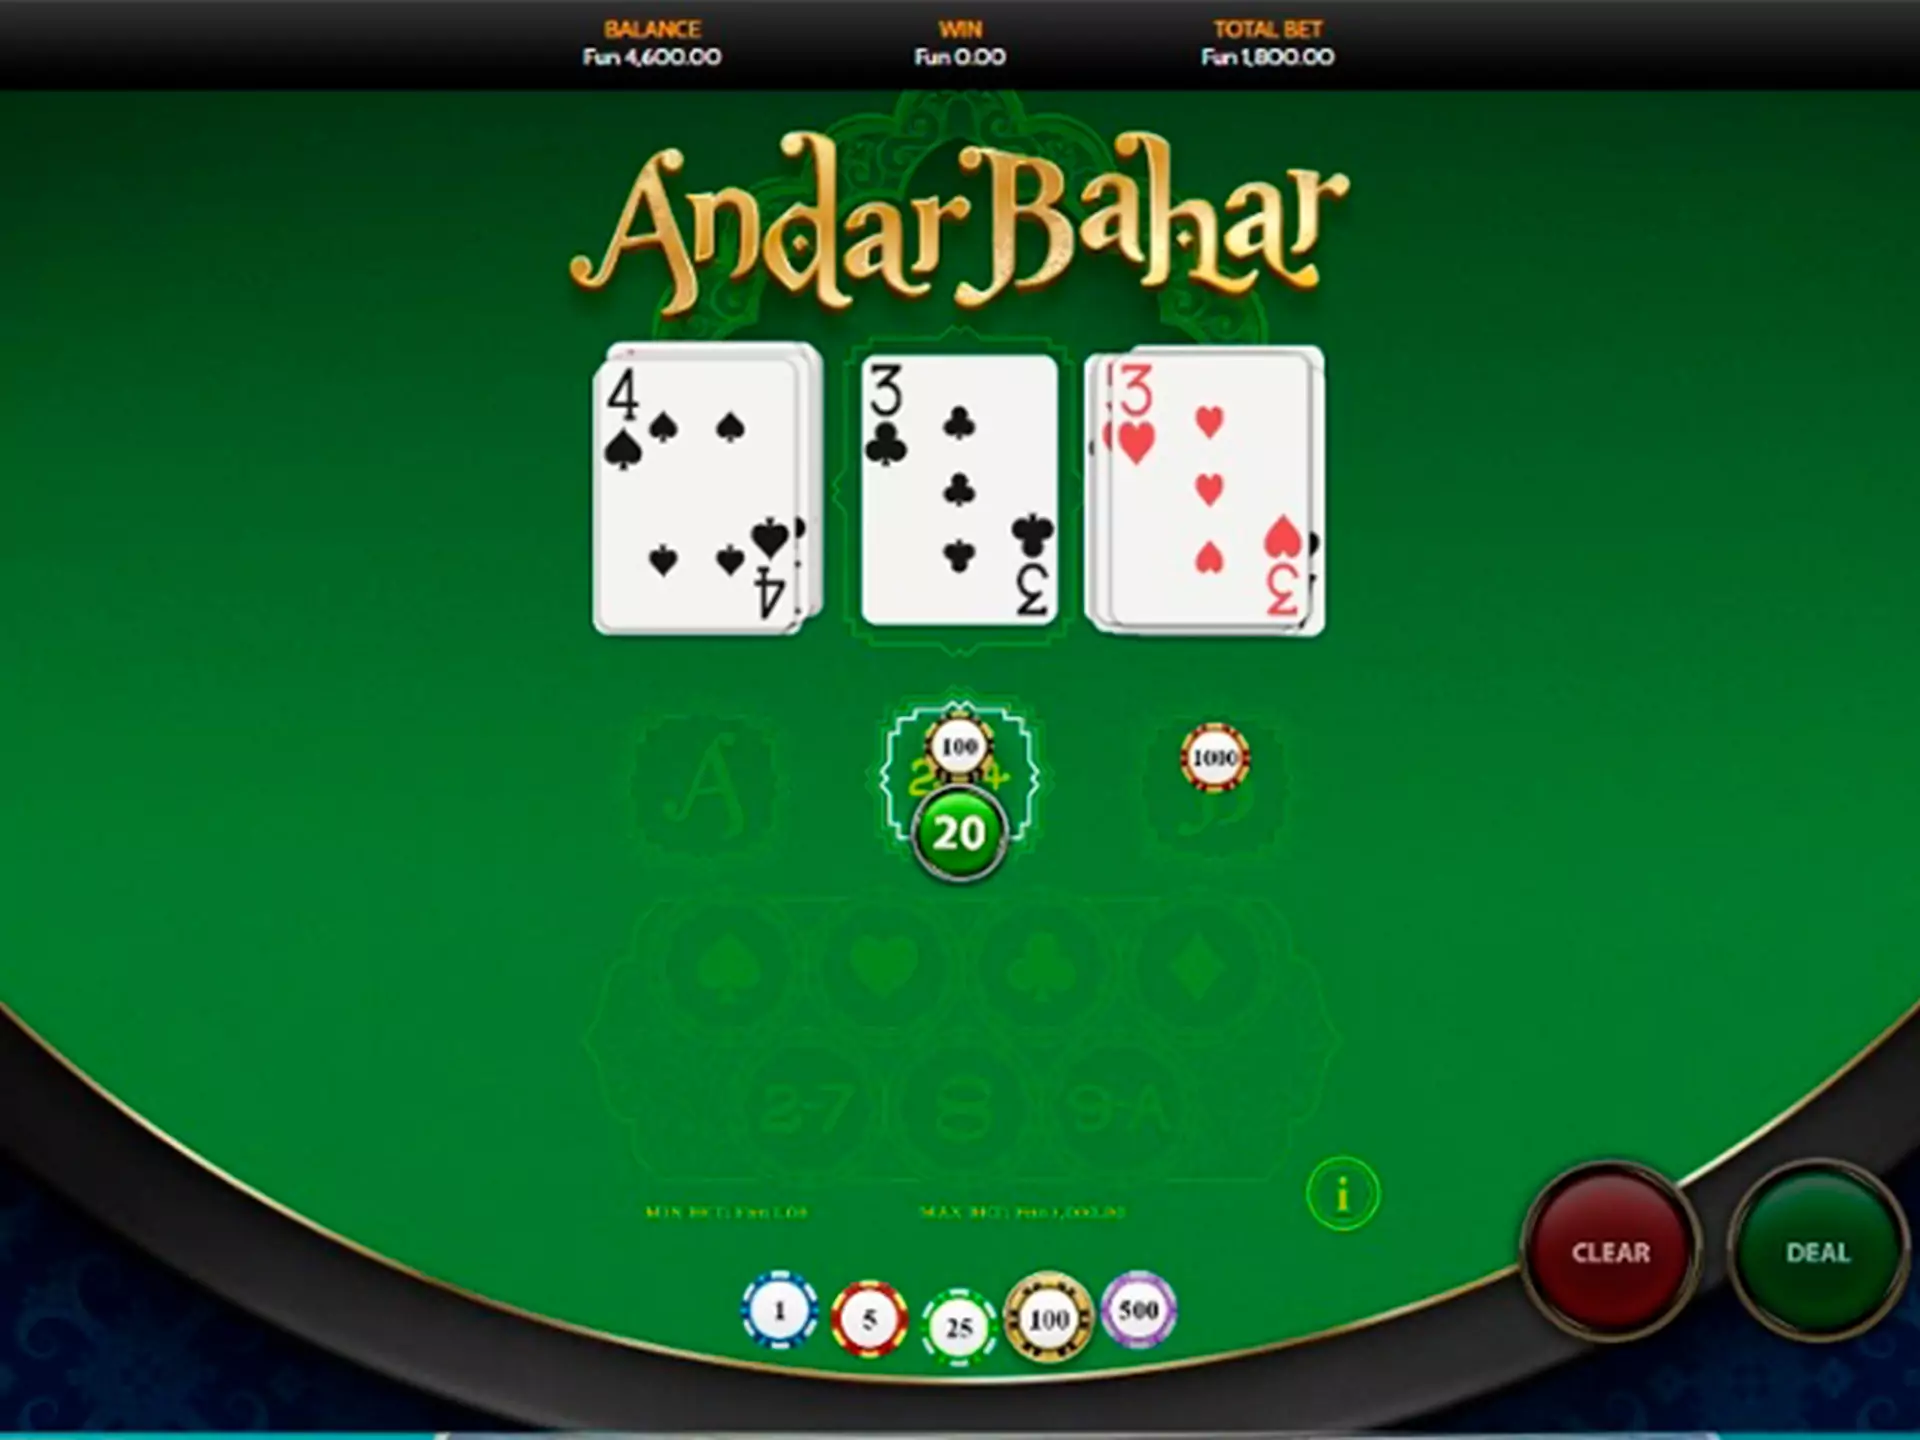 You can play Andar Bahar at almost evety Indian online casino.